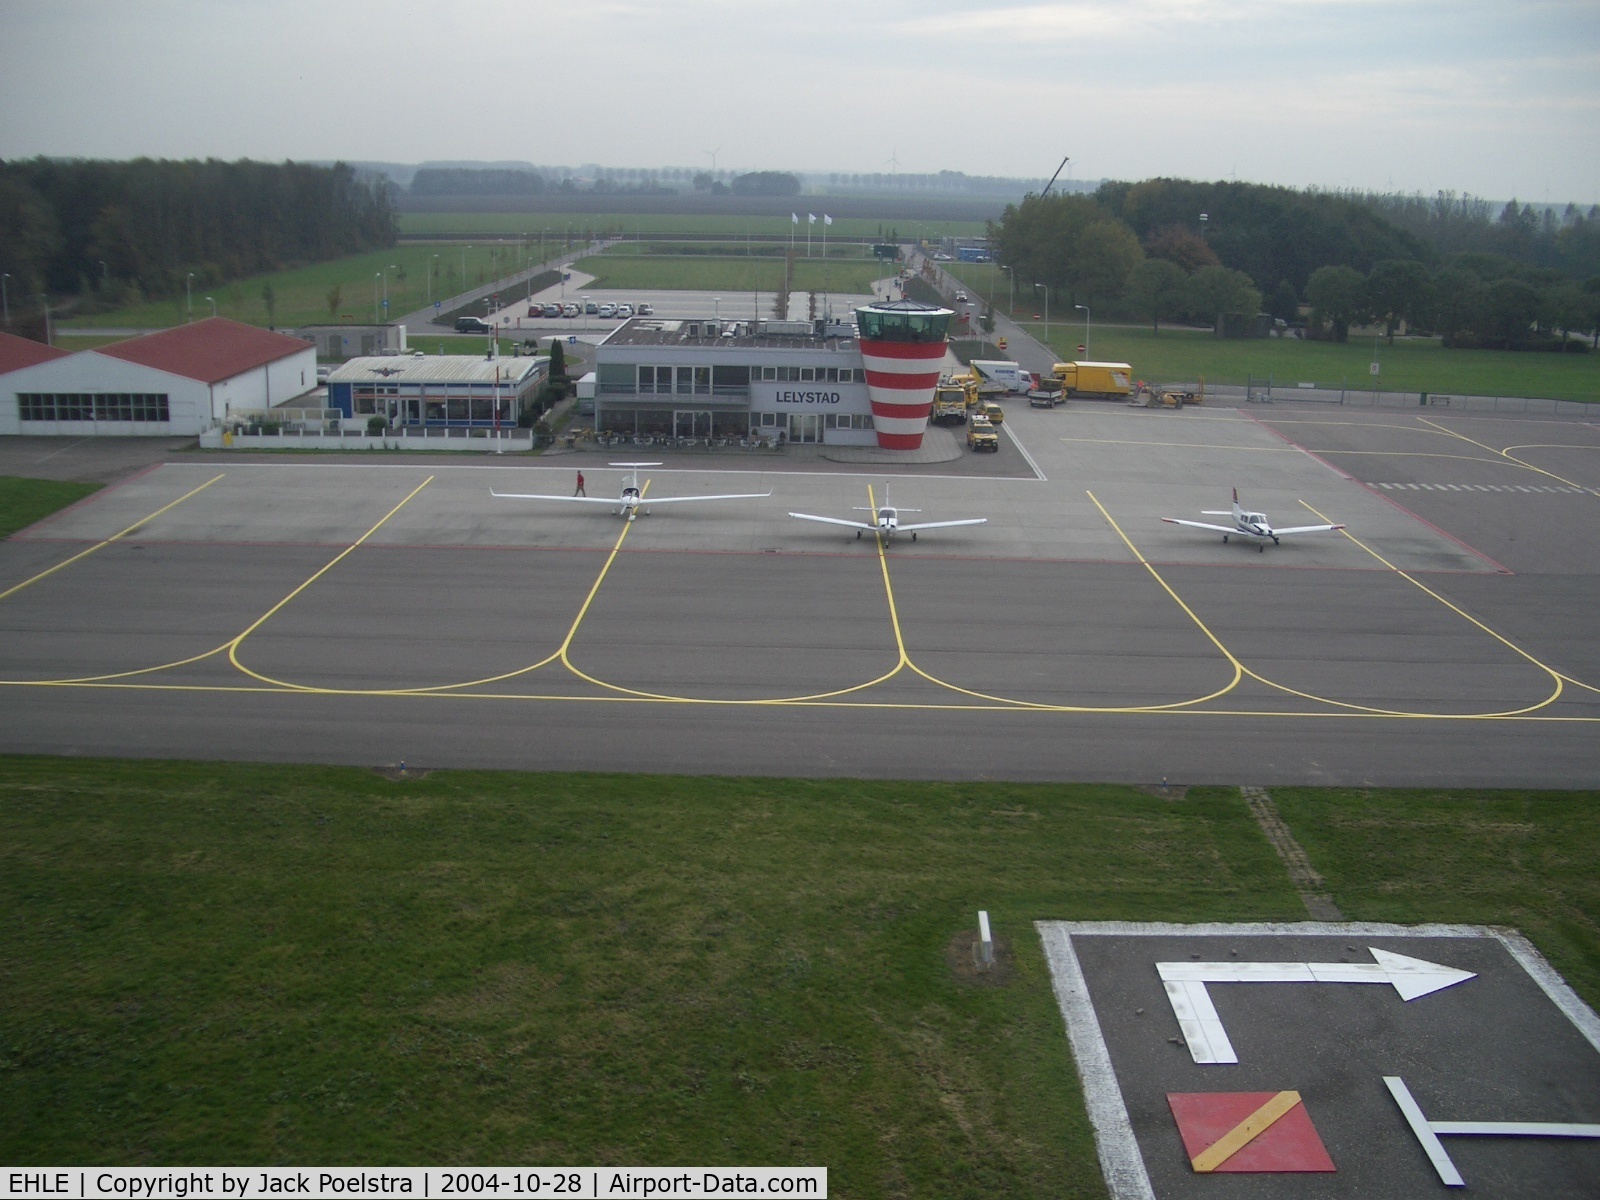 Lelystad Airport, Lelystad Netherlands (EHLE) - Tower and terminal